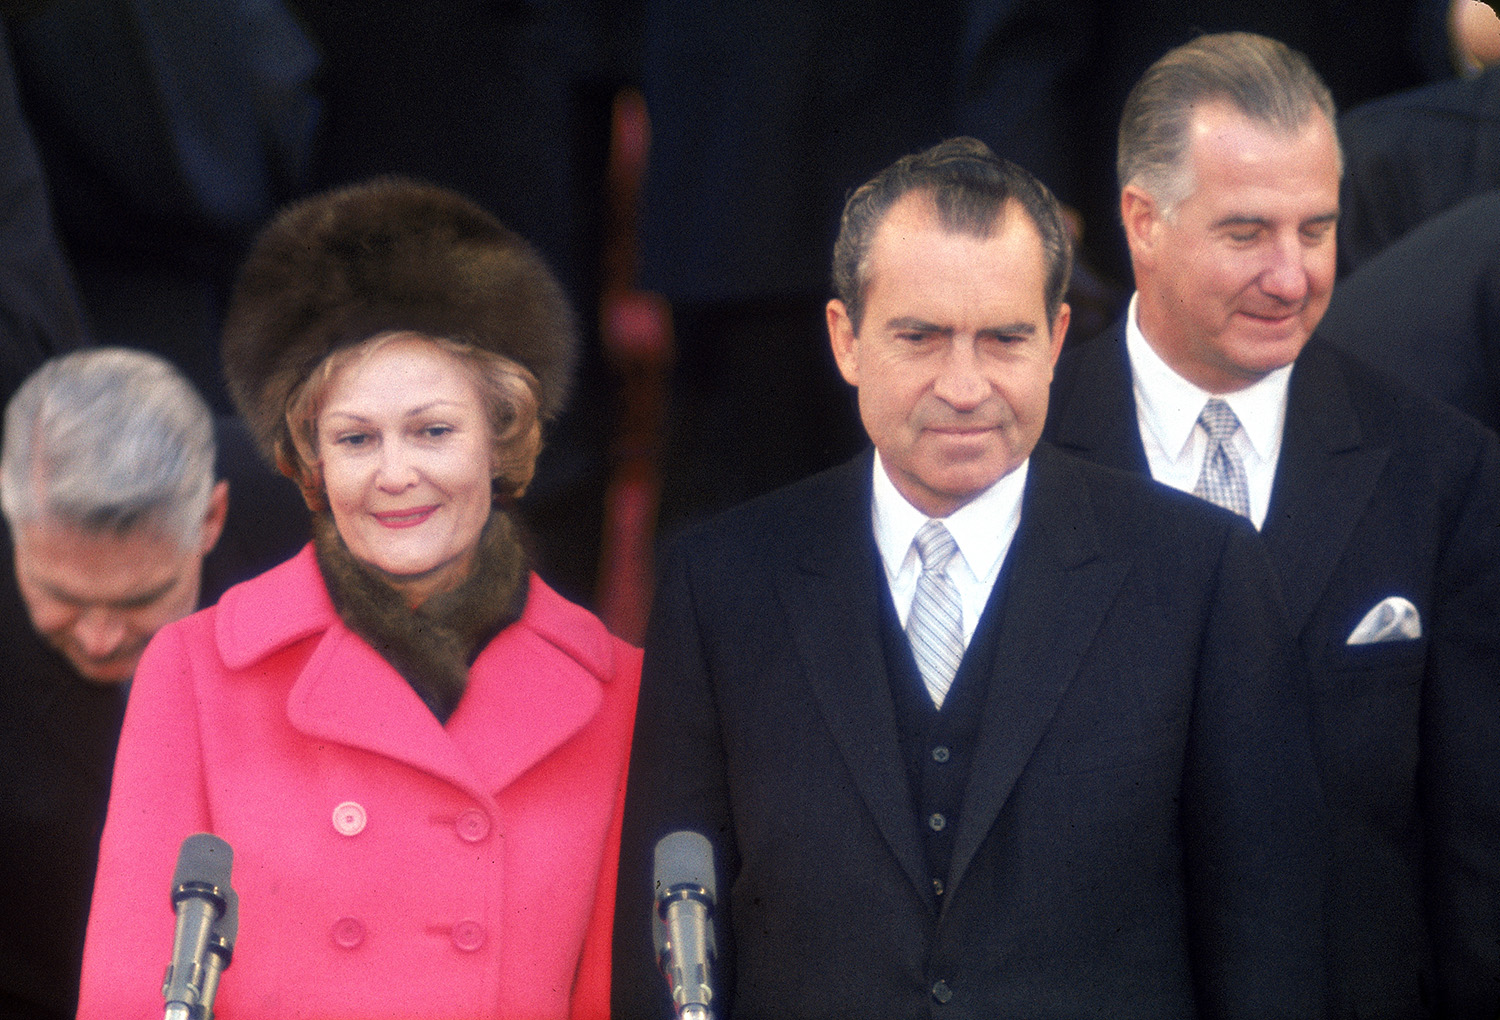 New First Lady Patricia Nixon with her husband, President Richard M. Nixon at his Inauguration. (Henry Groskinsky/The LIFE Picture Collection/Getty Images)